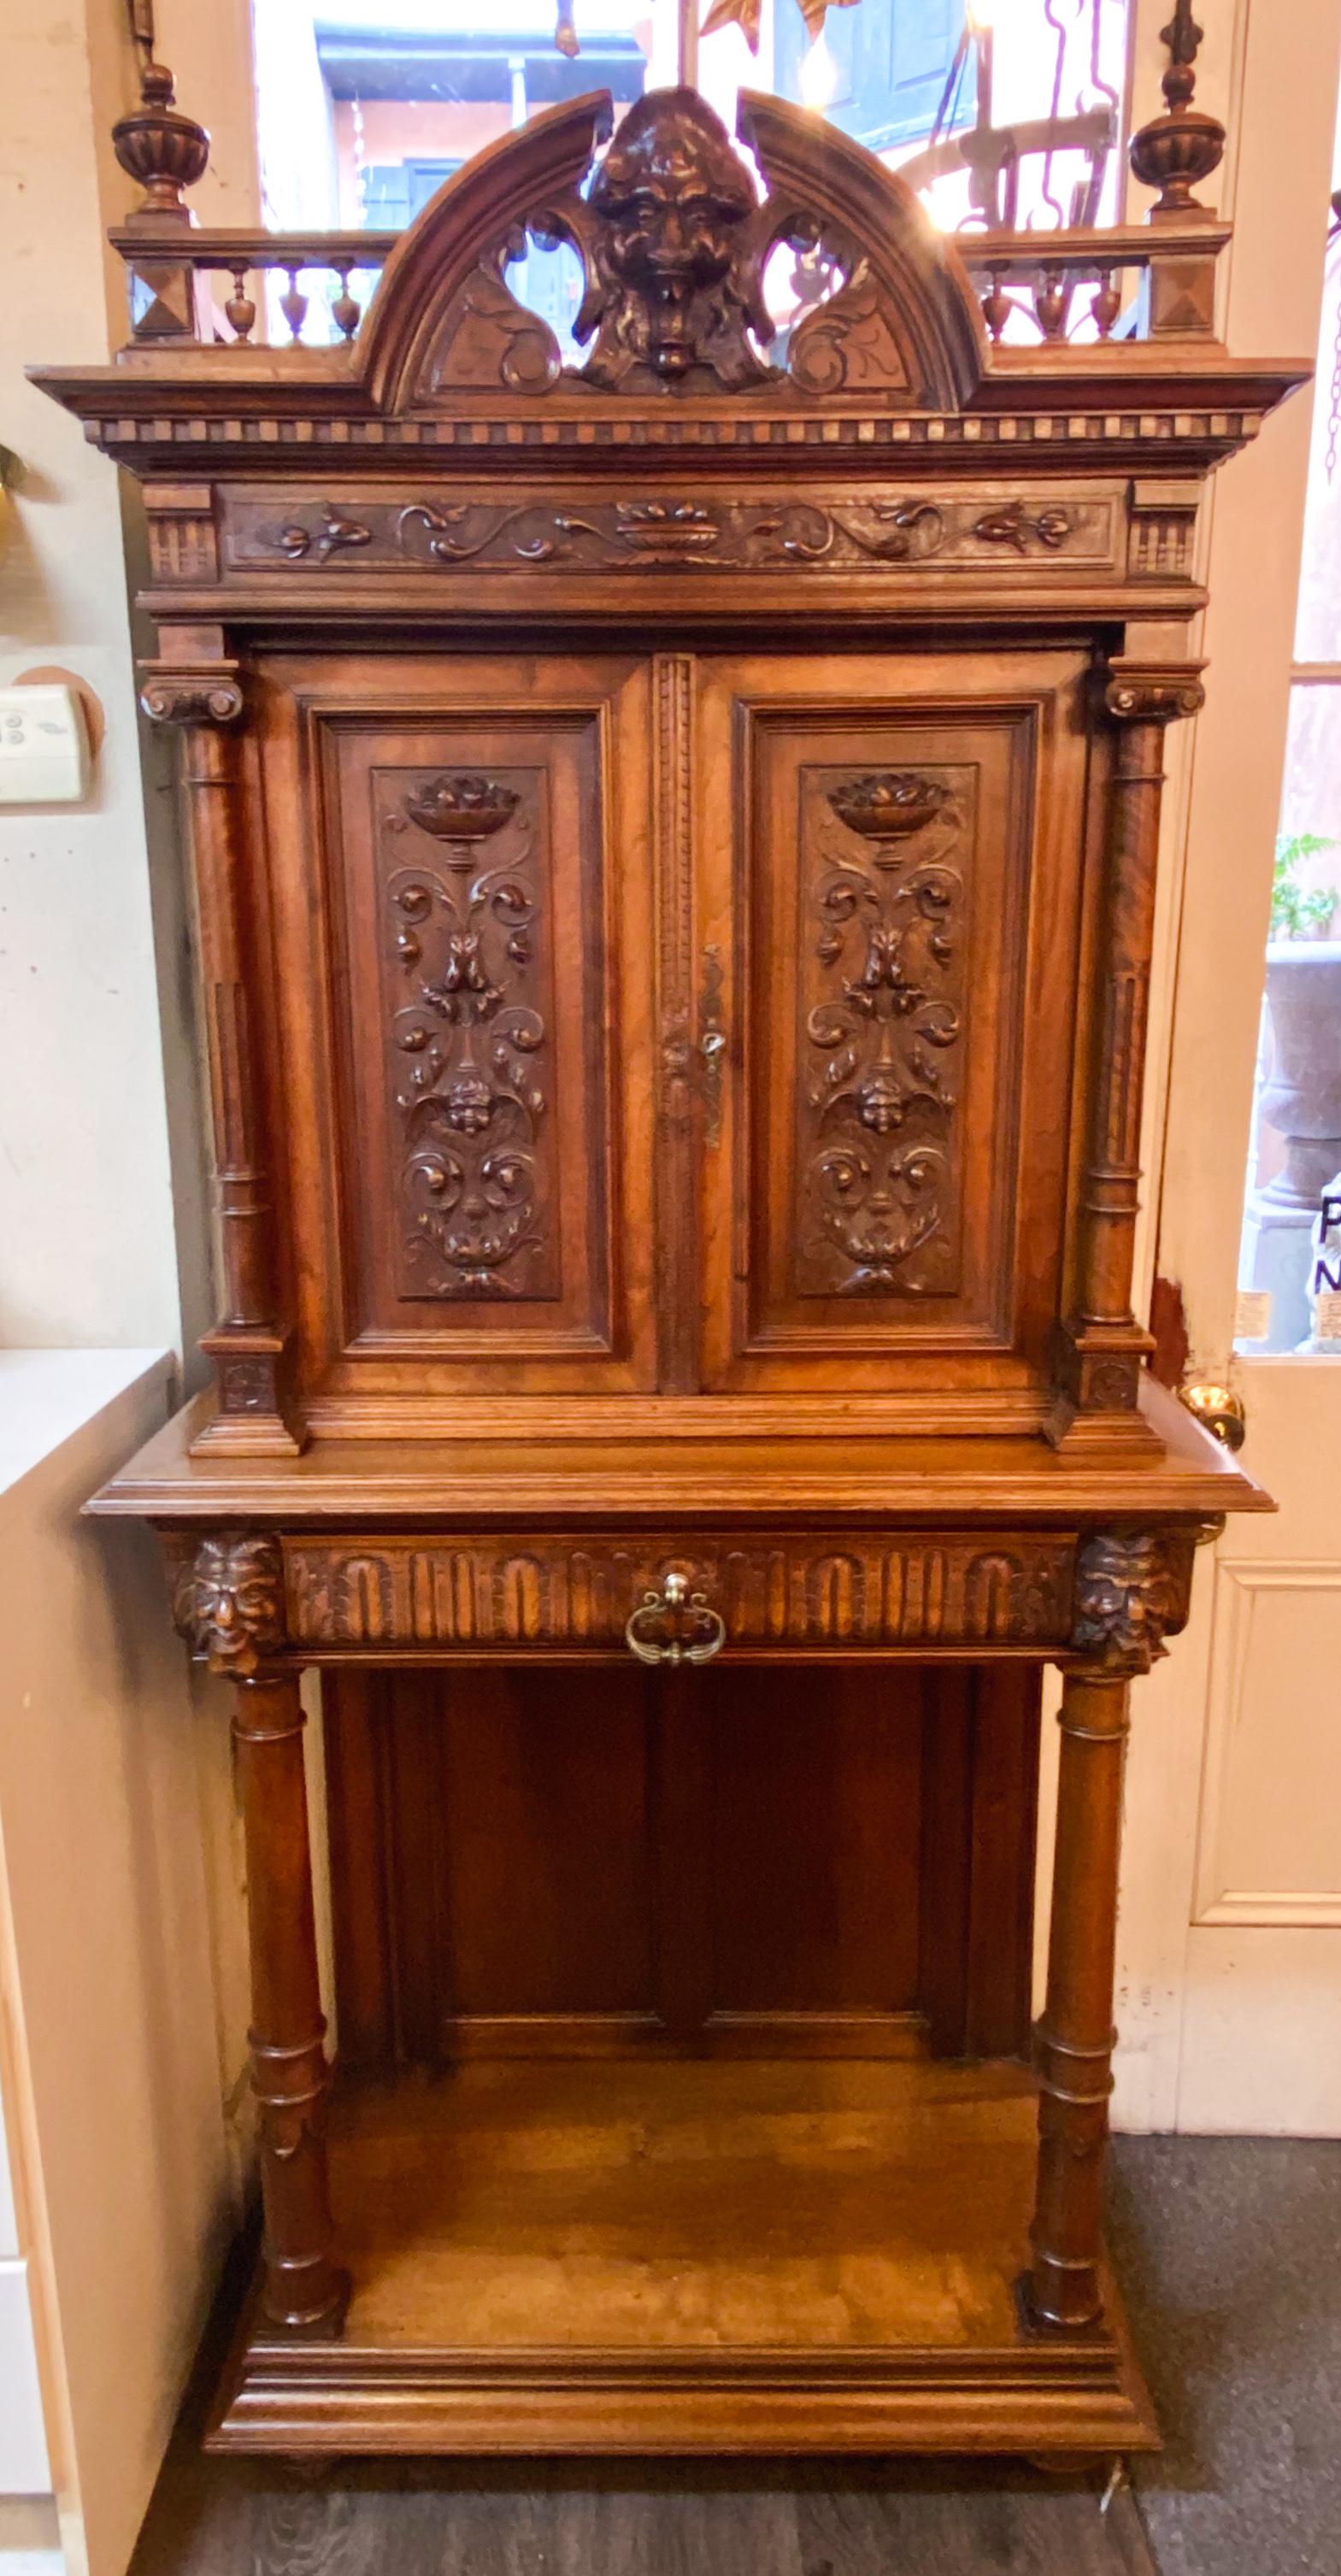 Antique French carved walnut Francis the first style sideboard, circa 1880-1890.